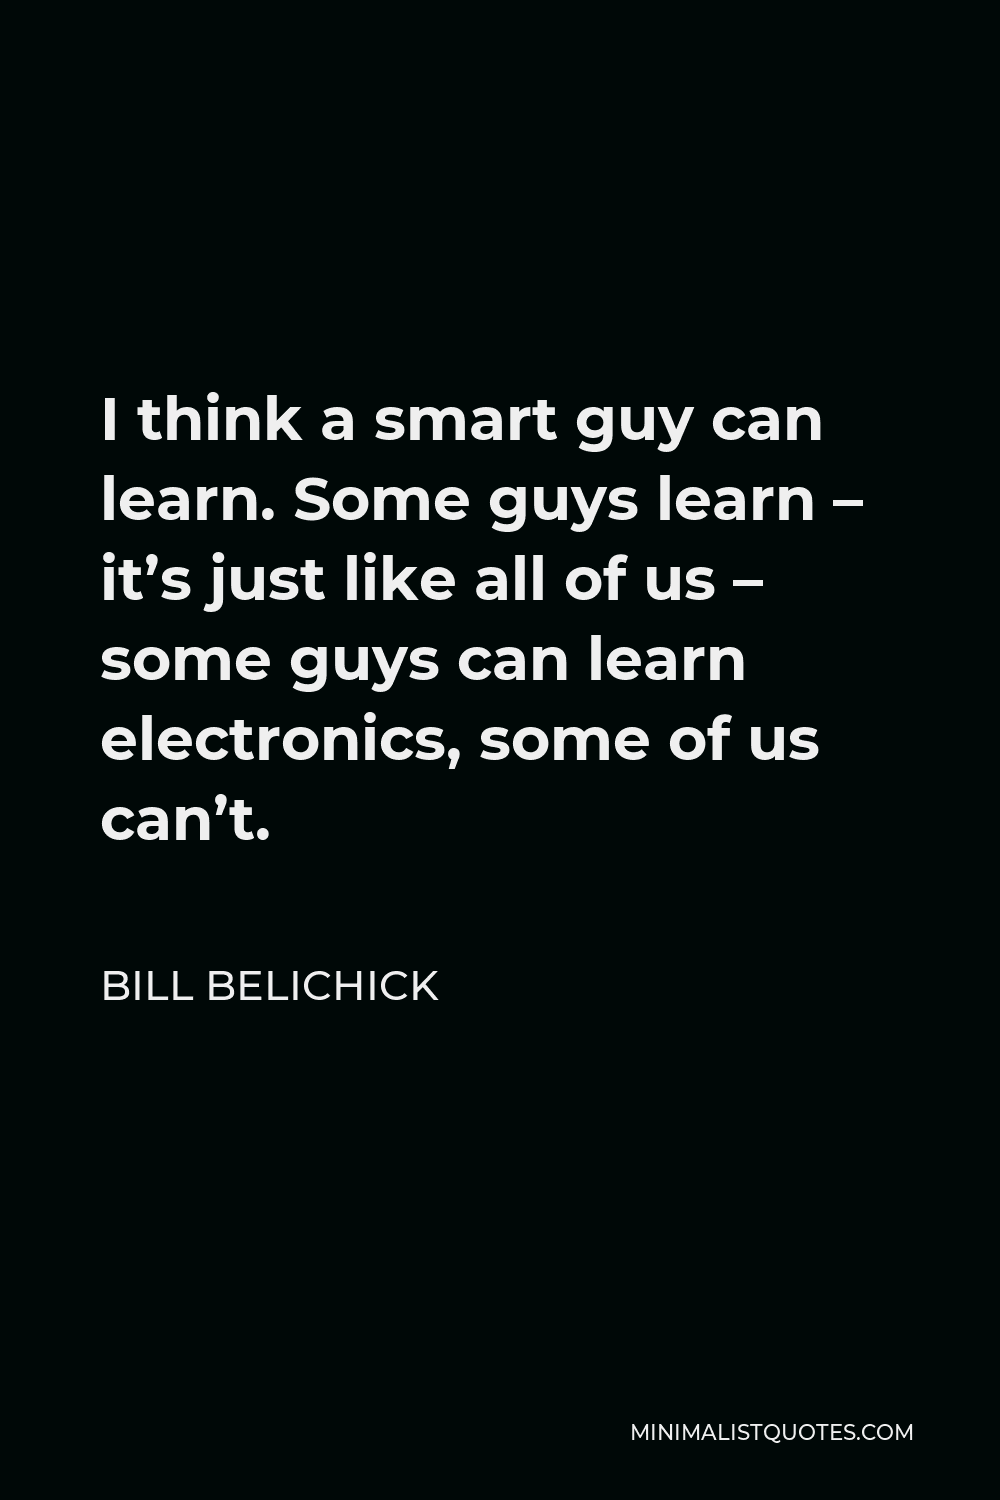 Bill Belichick Quote - I think a smart guy can learn. Some guys learn – it’s just like all of us – some guys can learn electronics, some of us can’t.